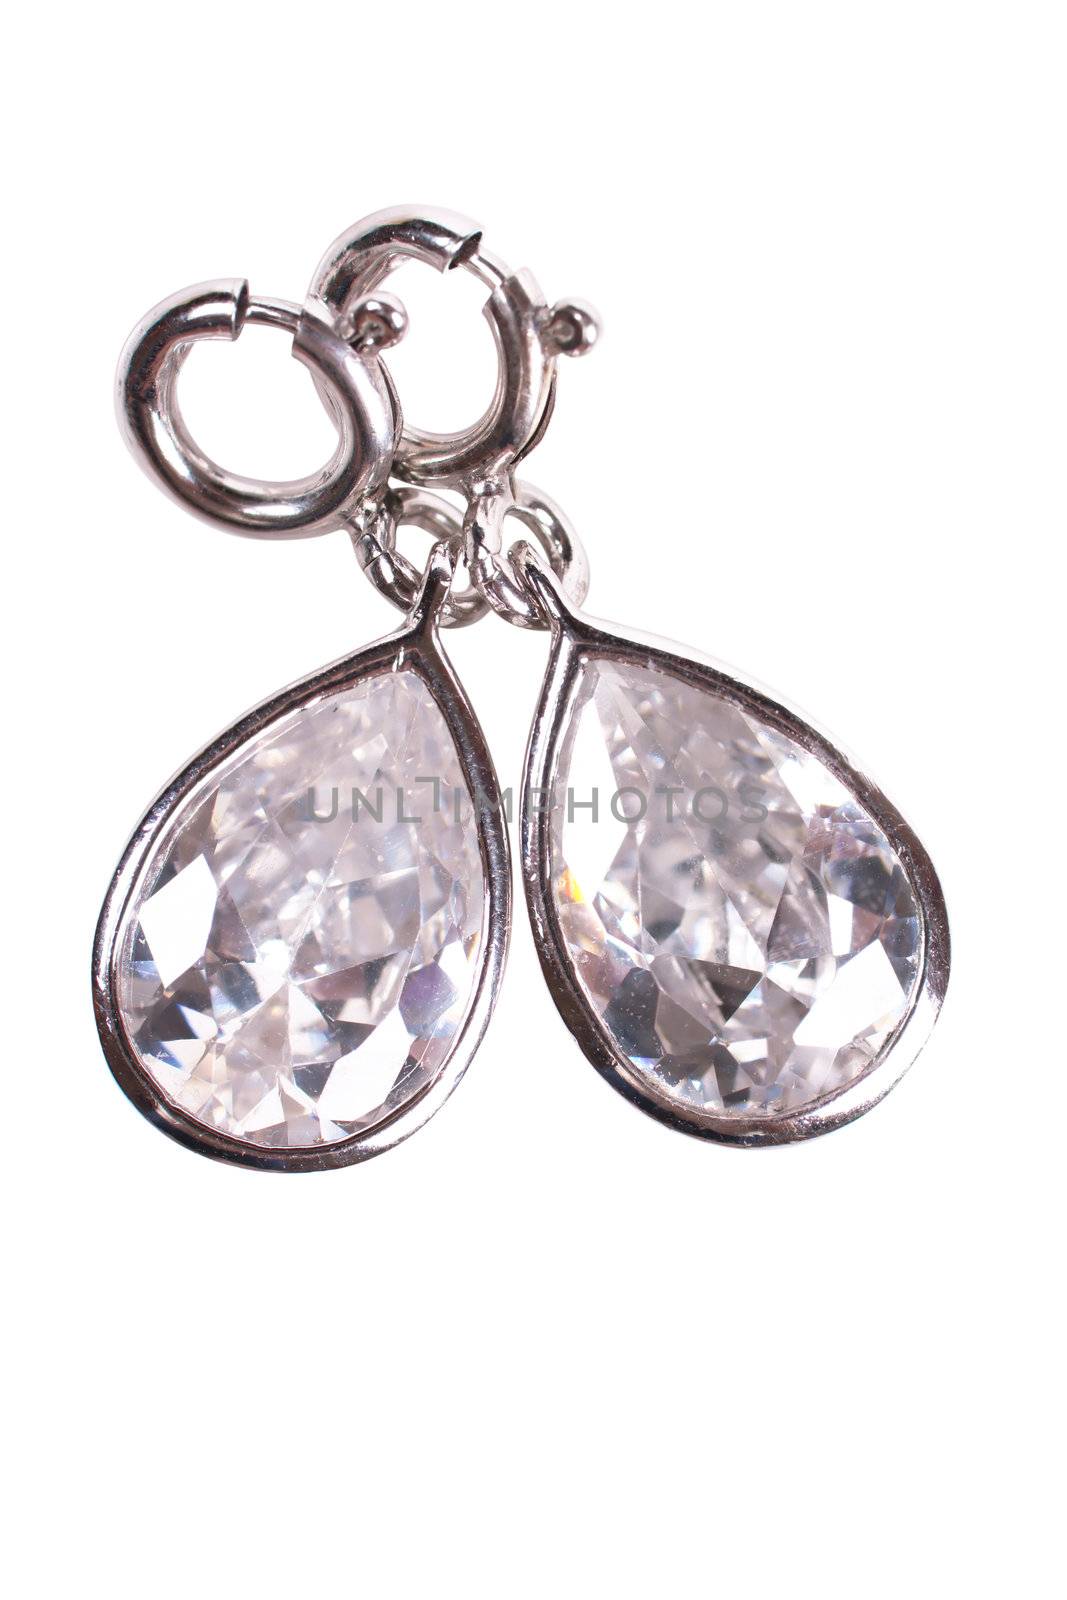 Closeup view of two silver earrings over white background